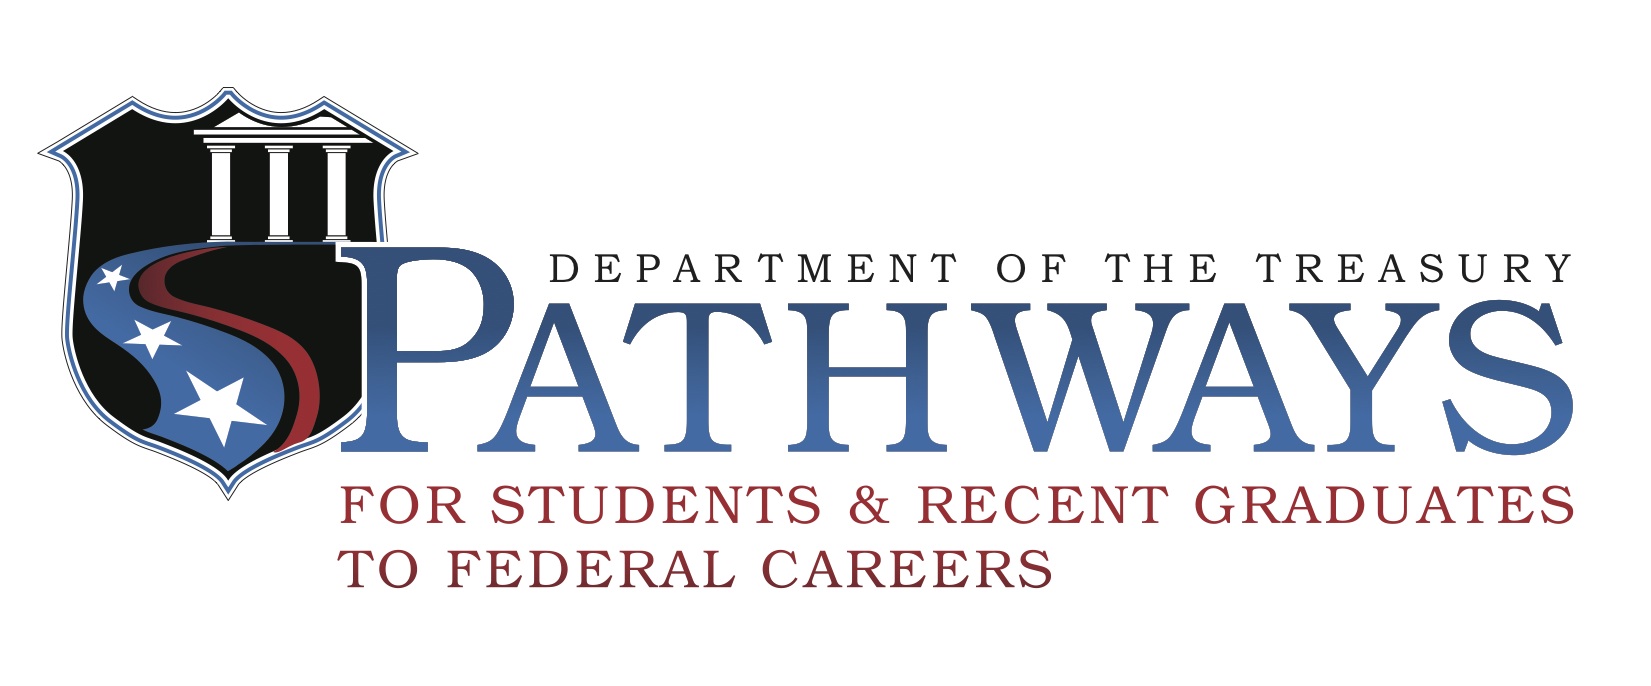 Department of the Treasury Pathways for Student & Recent Graduates to Federal Careers